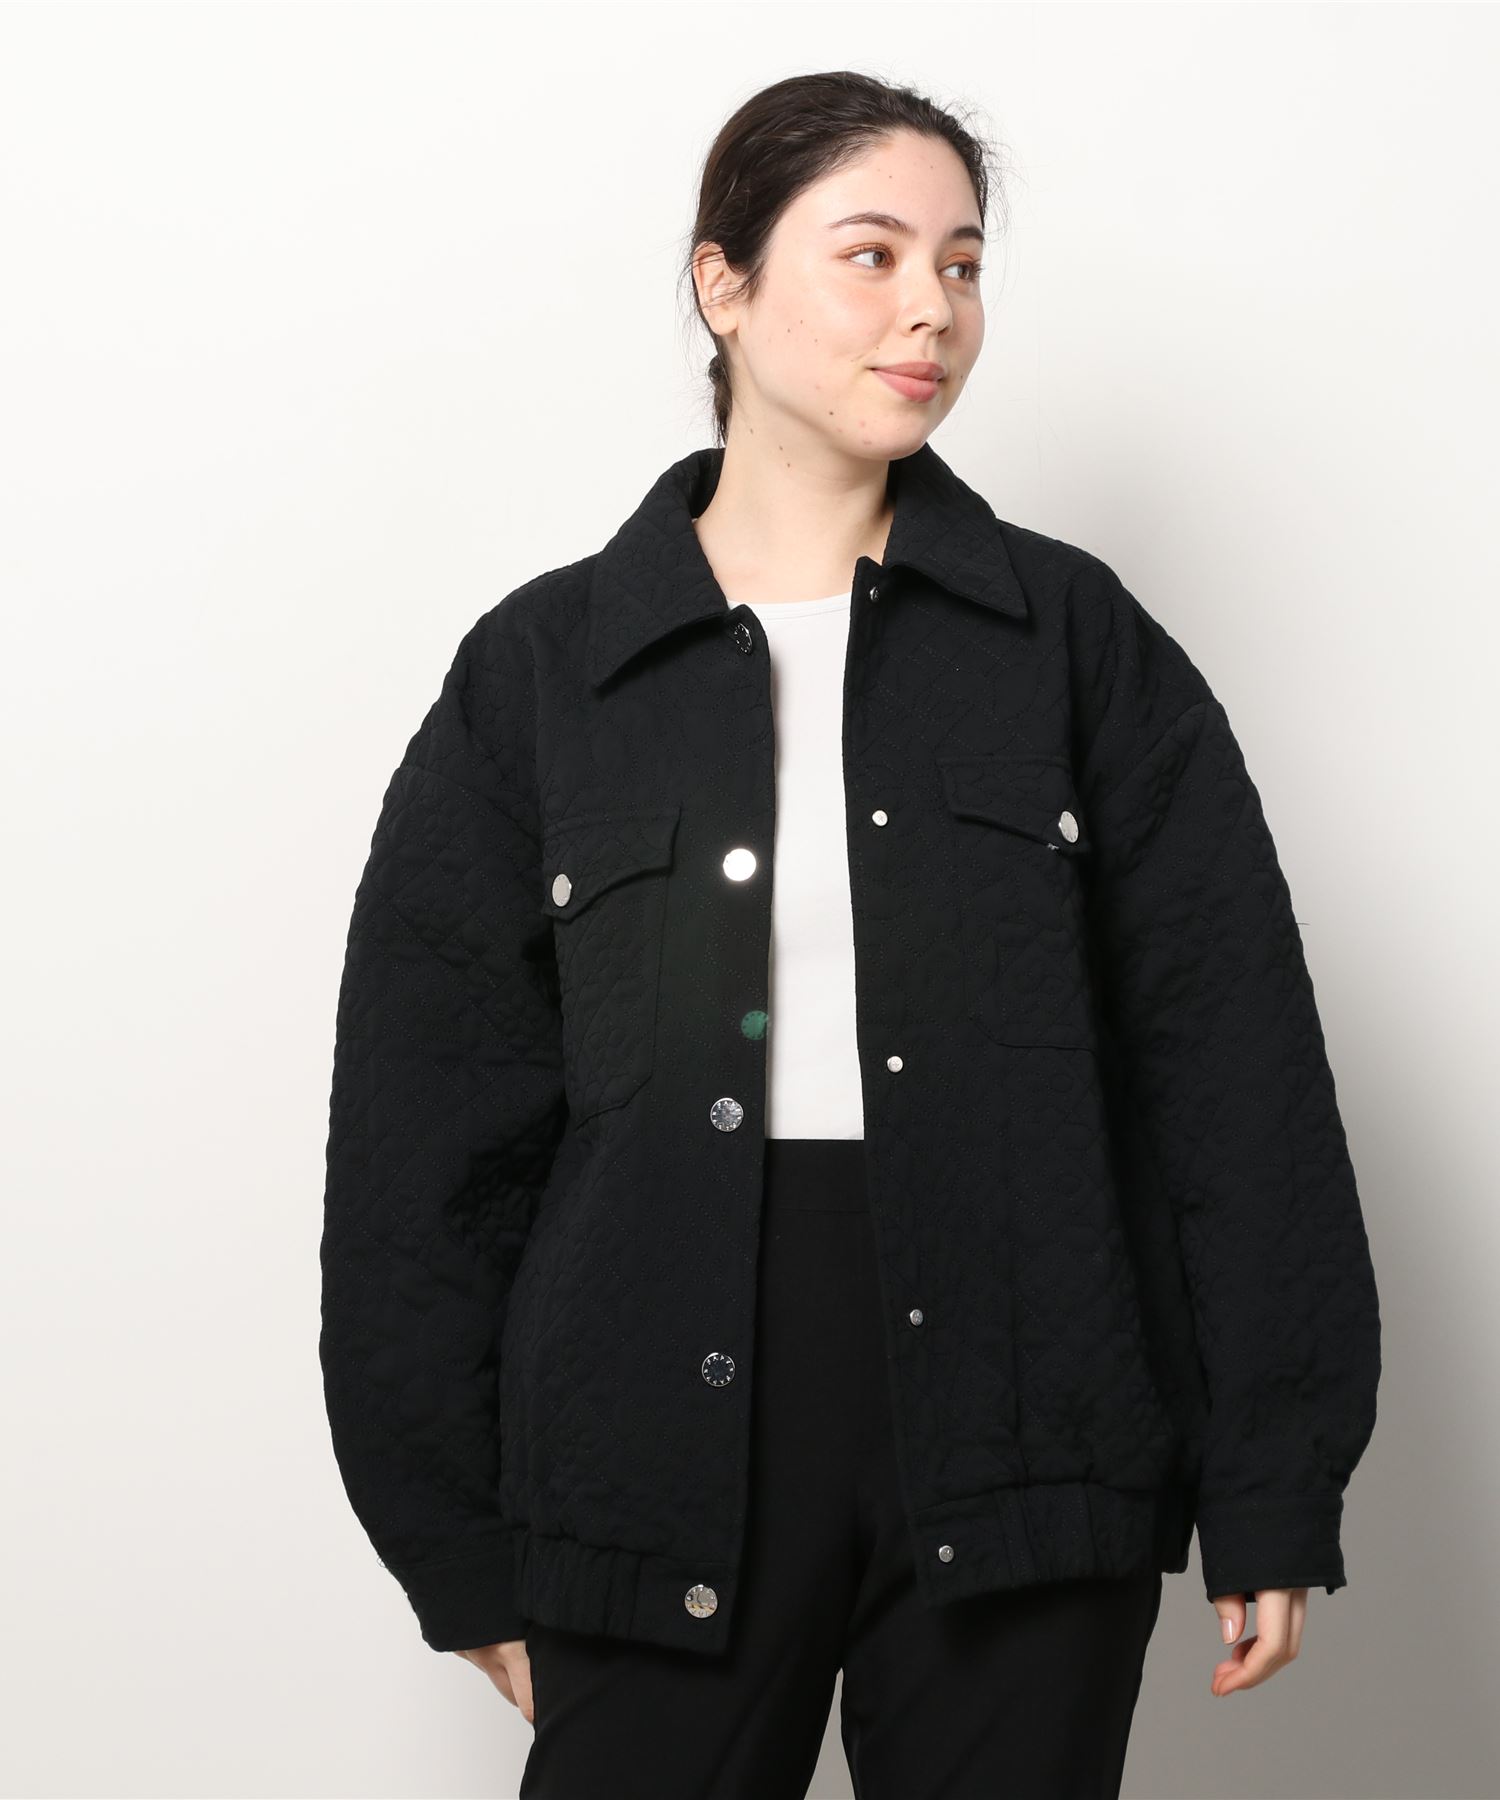 BAPY BY 祝開店大放出セール開催中 A BATHING APEBPY クリスマスツリー特価！ JACKET QUILTED